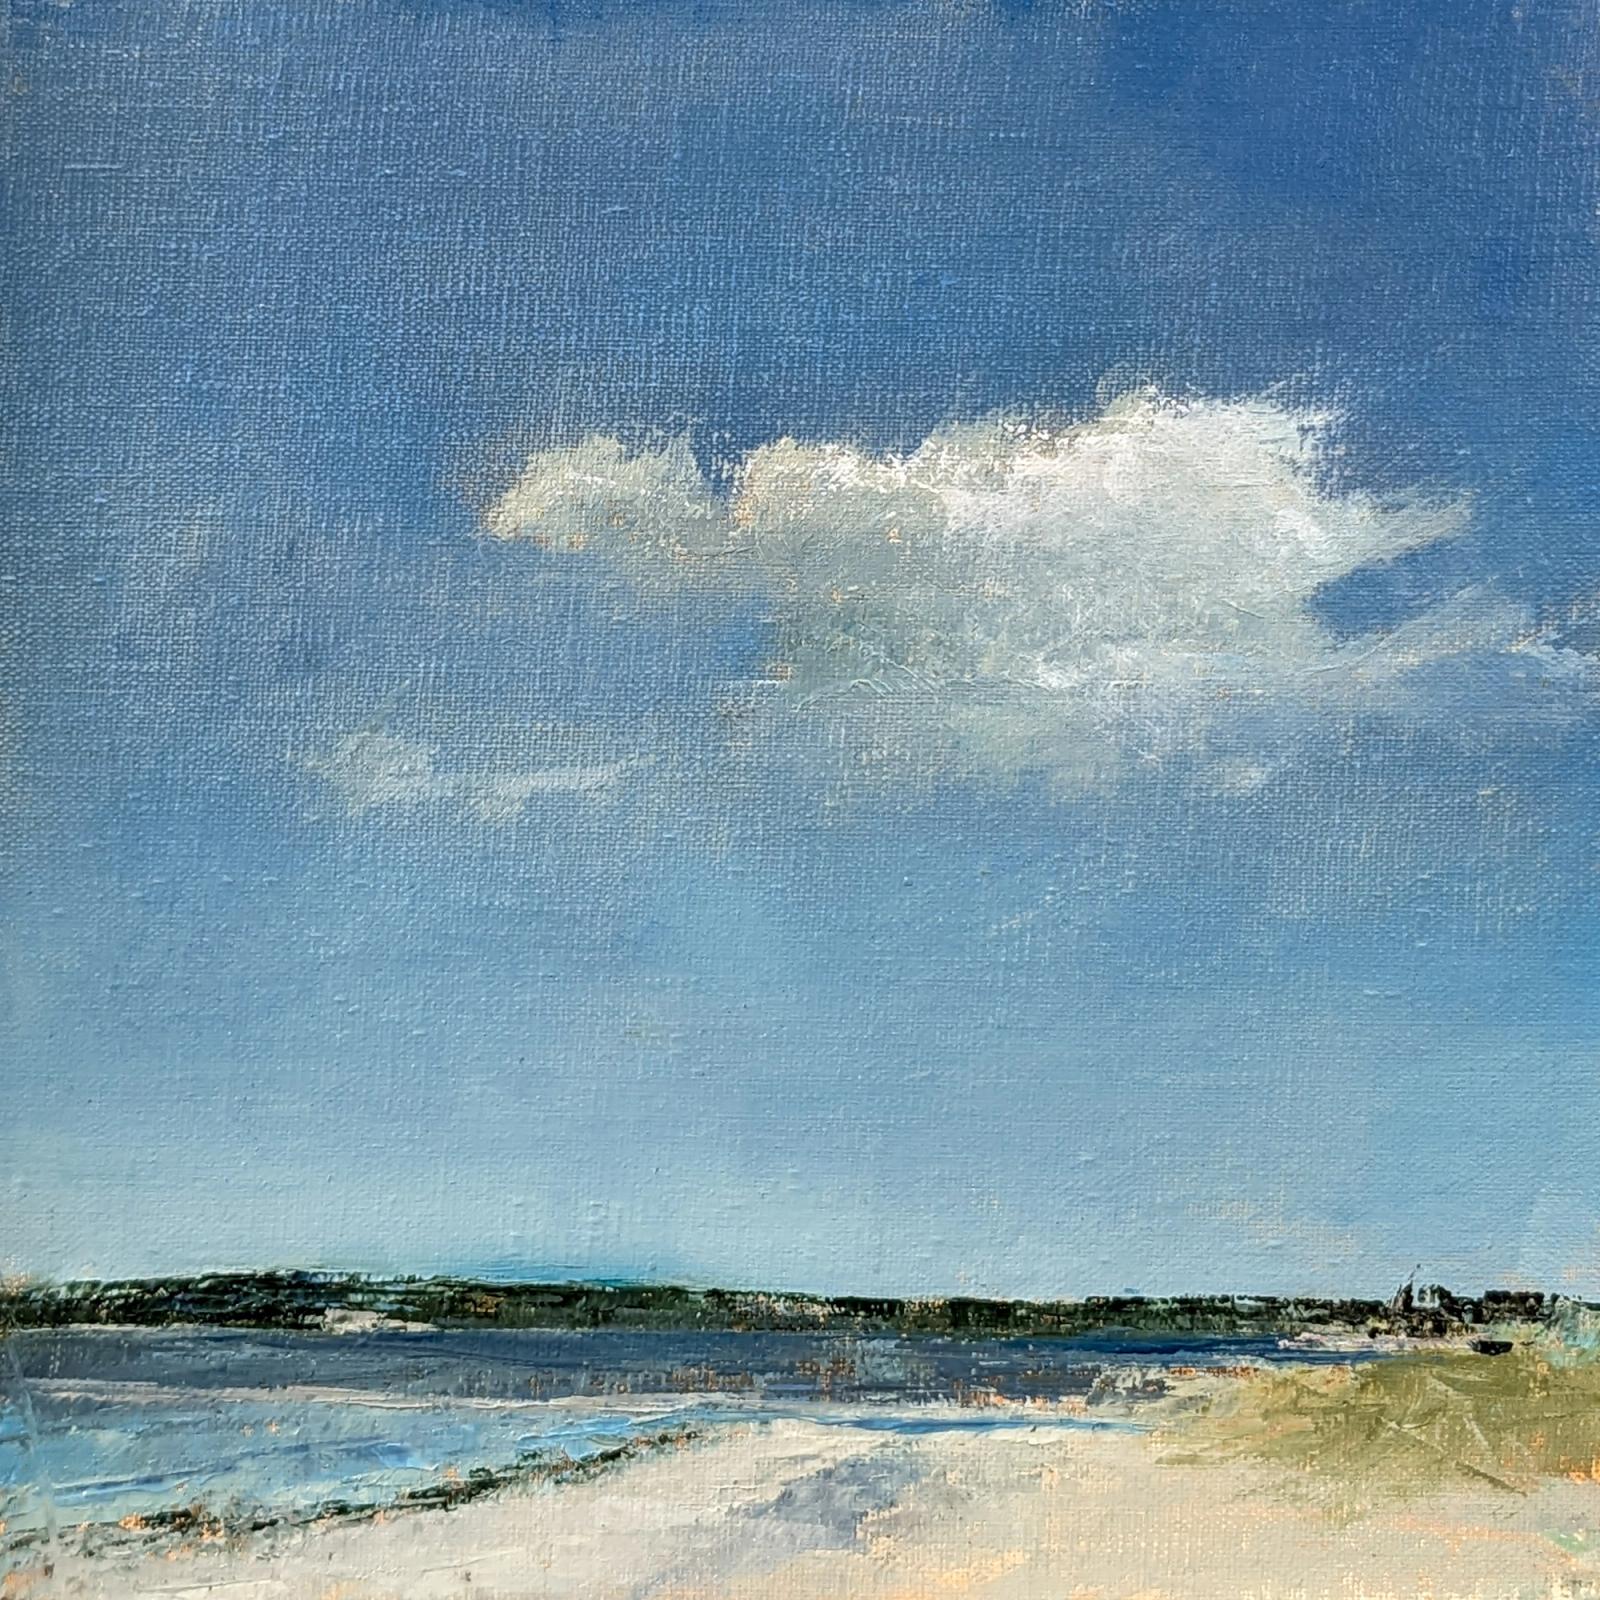 One cloud floating in a clear blue sky about a beach and distant shore.